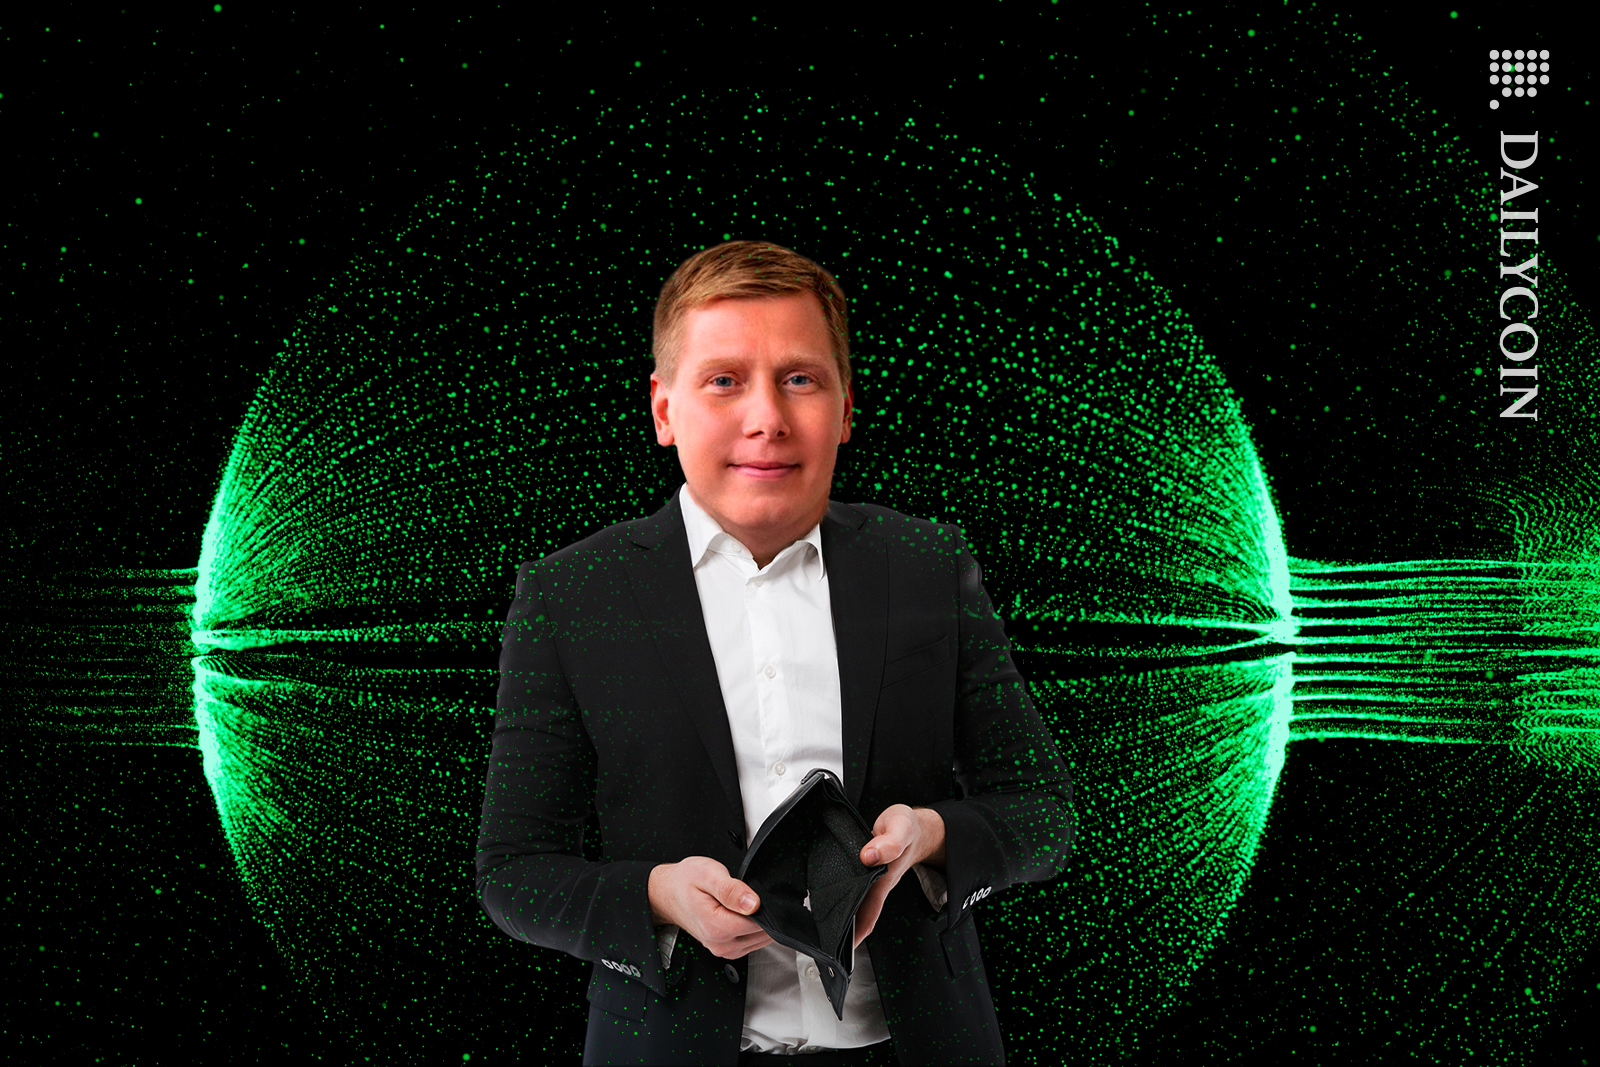 Barry Silbert coming out of a green laser dome showing empty wallet.